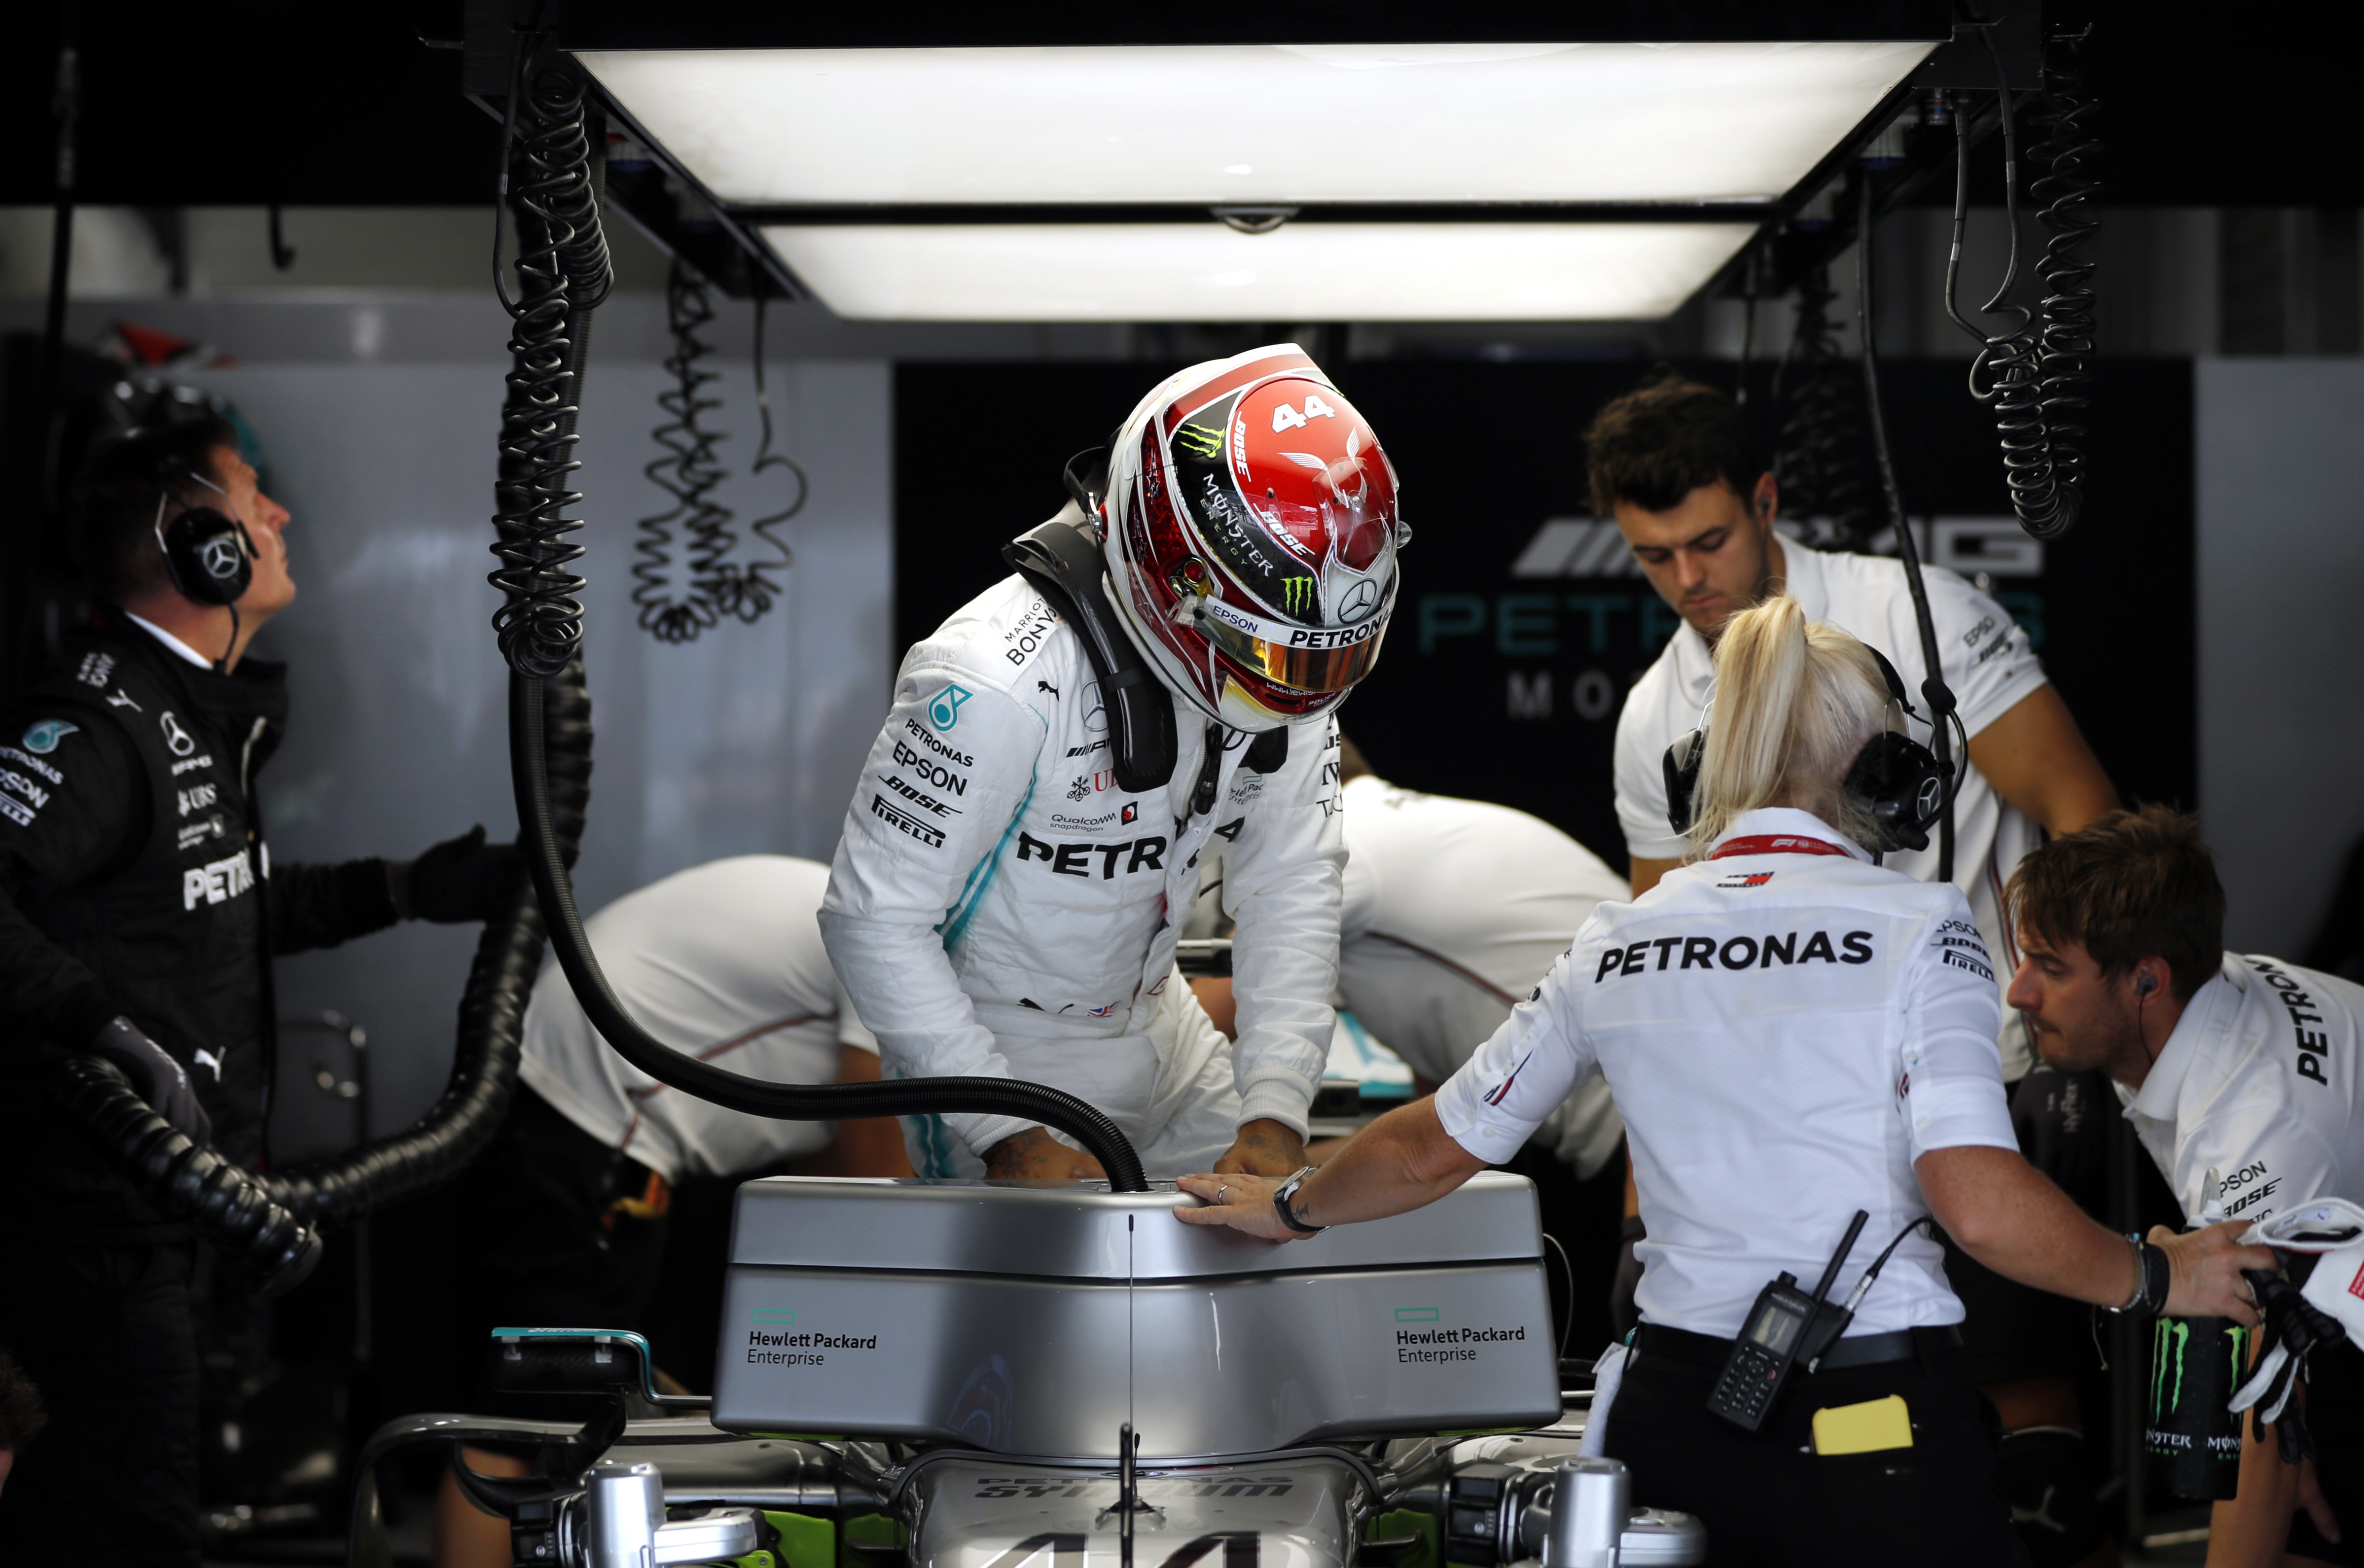 epa07872944 British Formula One driver Lewis Hamilton of Mercedes AMG GP (C) leaves his car in the pit lane during first practice session at the Formula One Grand Prix of Russia at the Sochi Autodrom circuit, in Sochi, Russia, 27 September 2019. The Formula One Grand Prix of Russia will take place on 29 September 2019  EPA/YURI KOCHETKOV